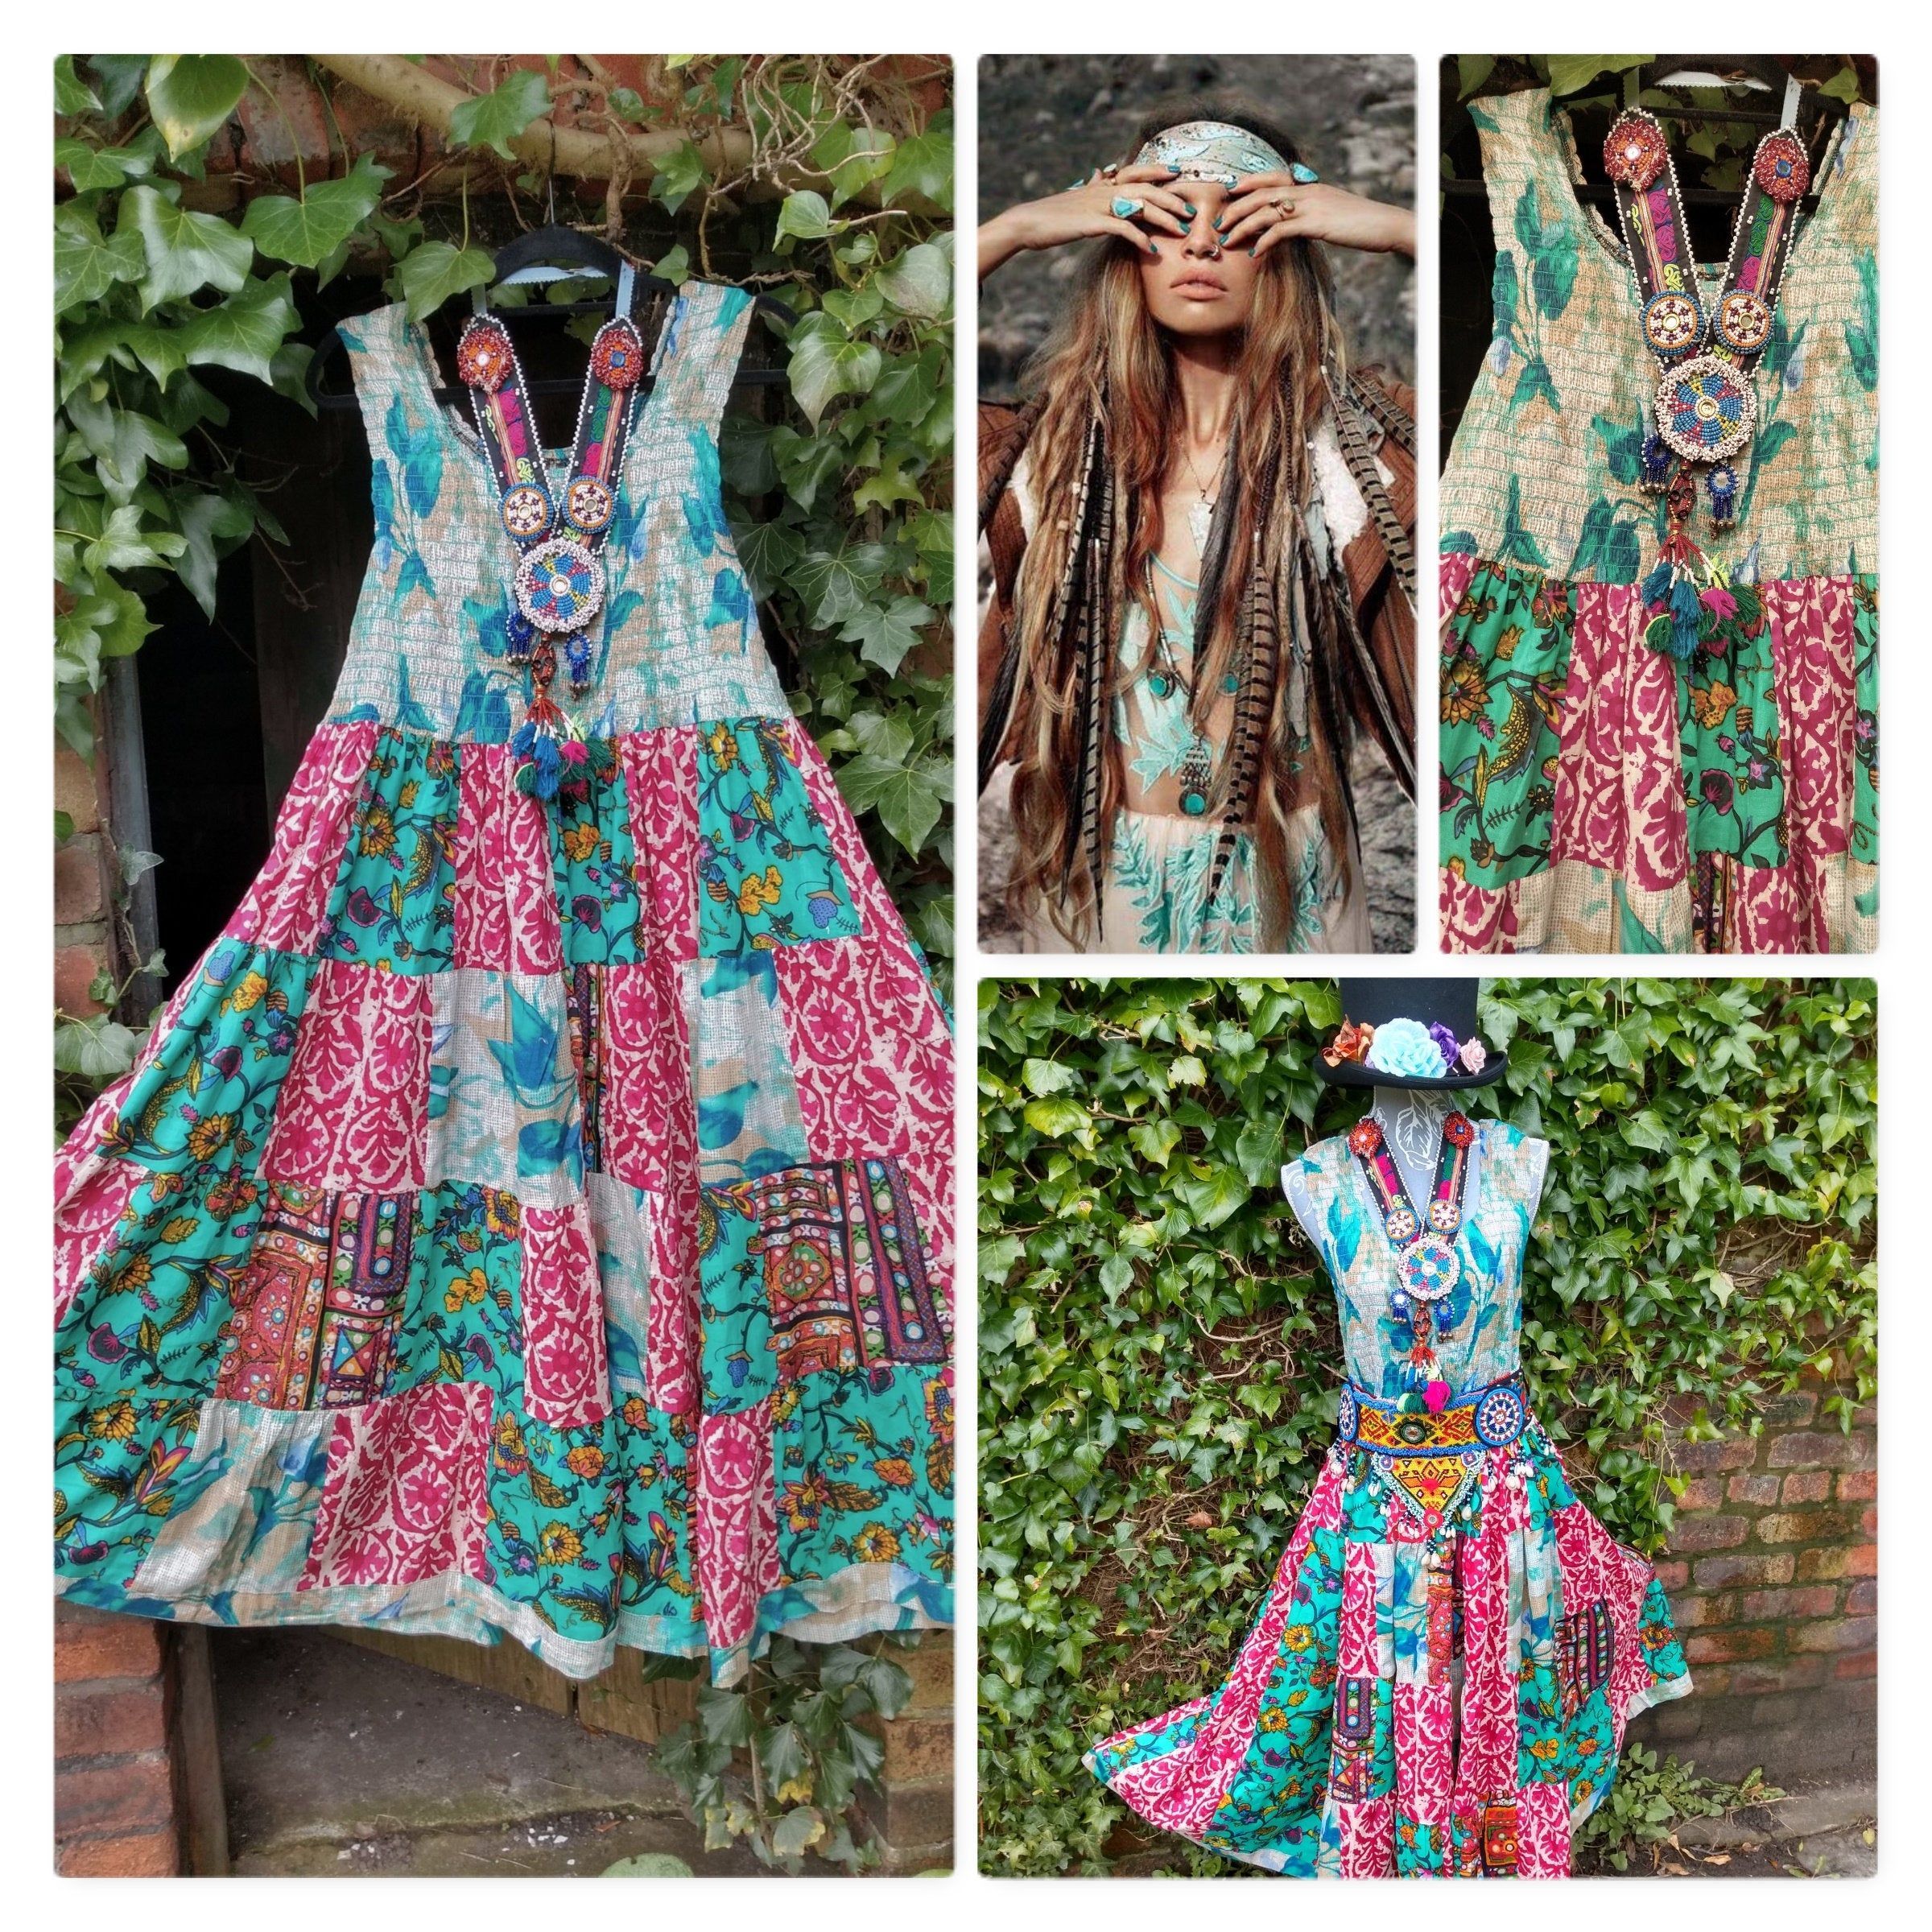 plus size fit several  Large REDUCED  gypsy stevie nicks patchwork beach dress boho hippie festival  reggae hippy dress fit several sizes - plus size fit several  Large REDUCED  gypsy stevie nicks patchwork beach dress boho hippie festival  reggae hippy dress fit several sizes -   16 diy Clothes hippie ideas